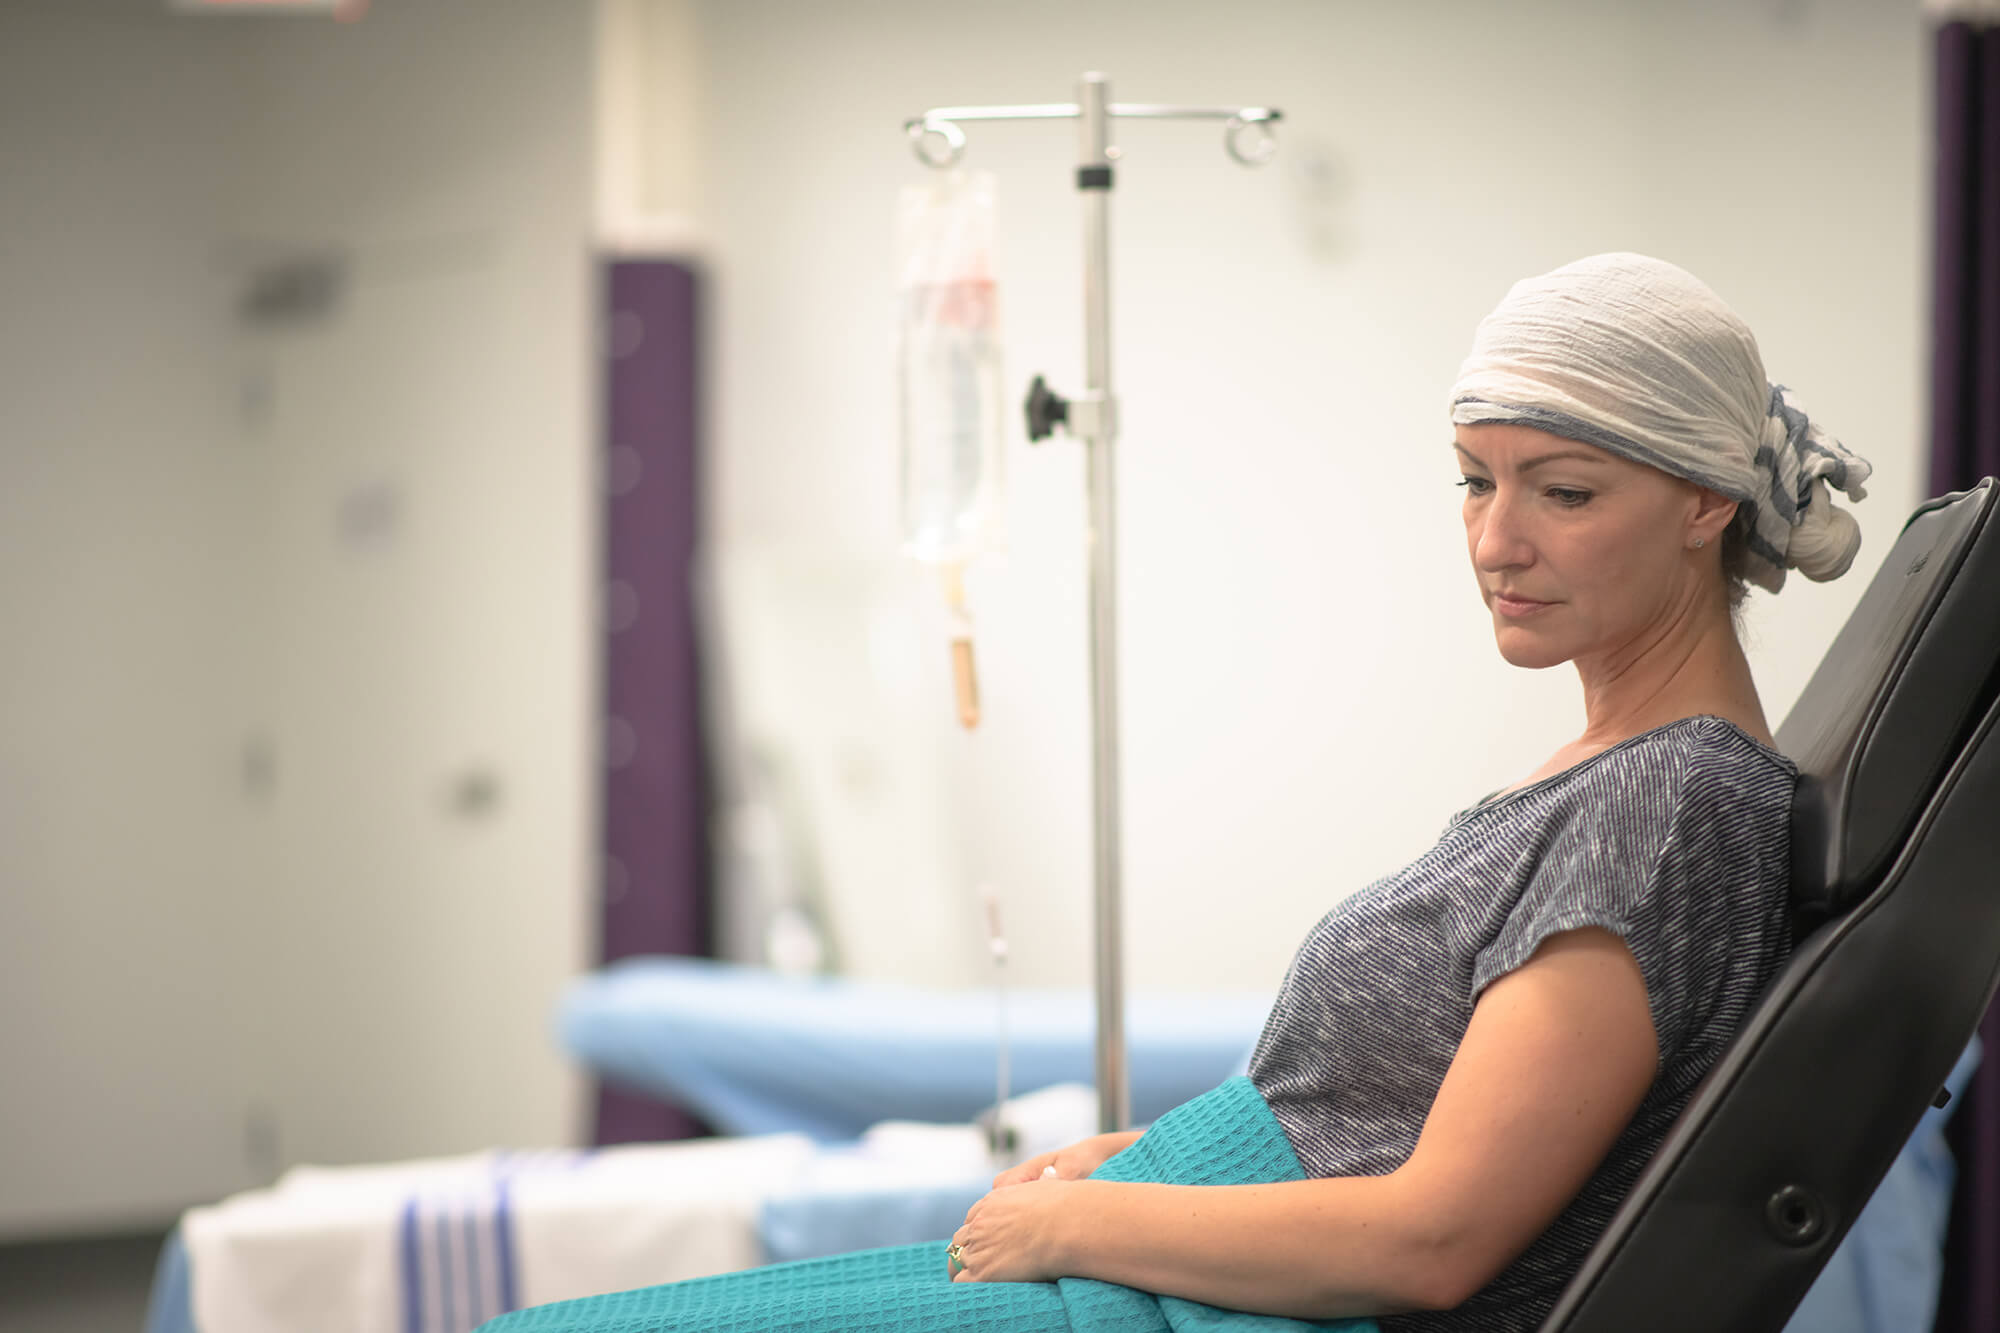 Patient receiving chemotherapy